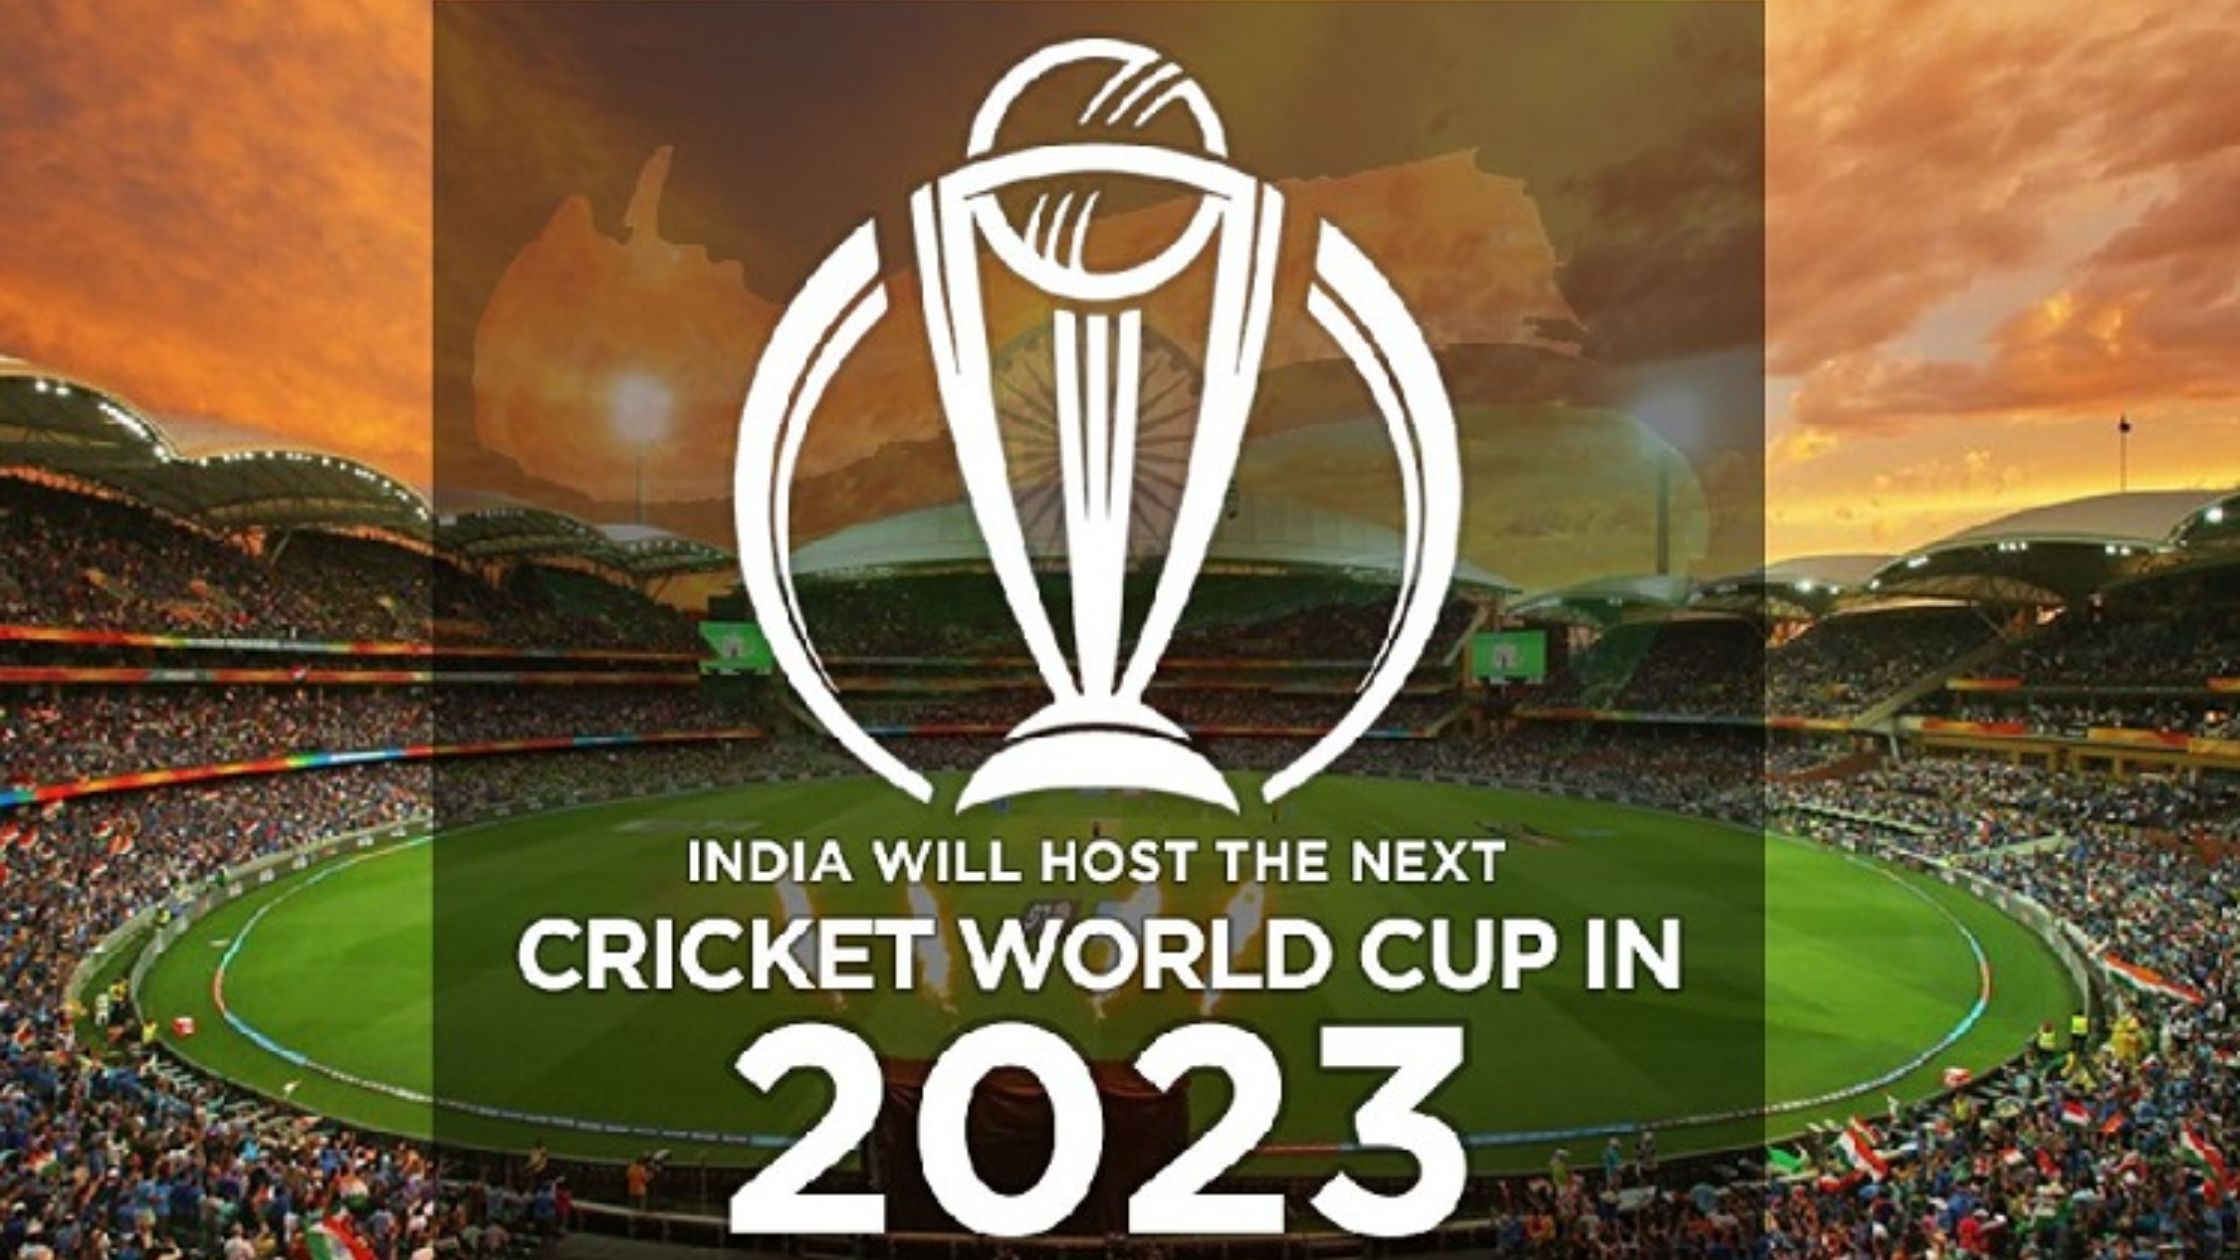 ICC Cricket World Cup in 2023